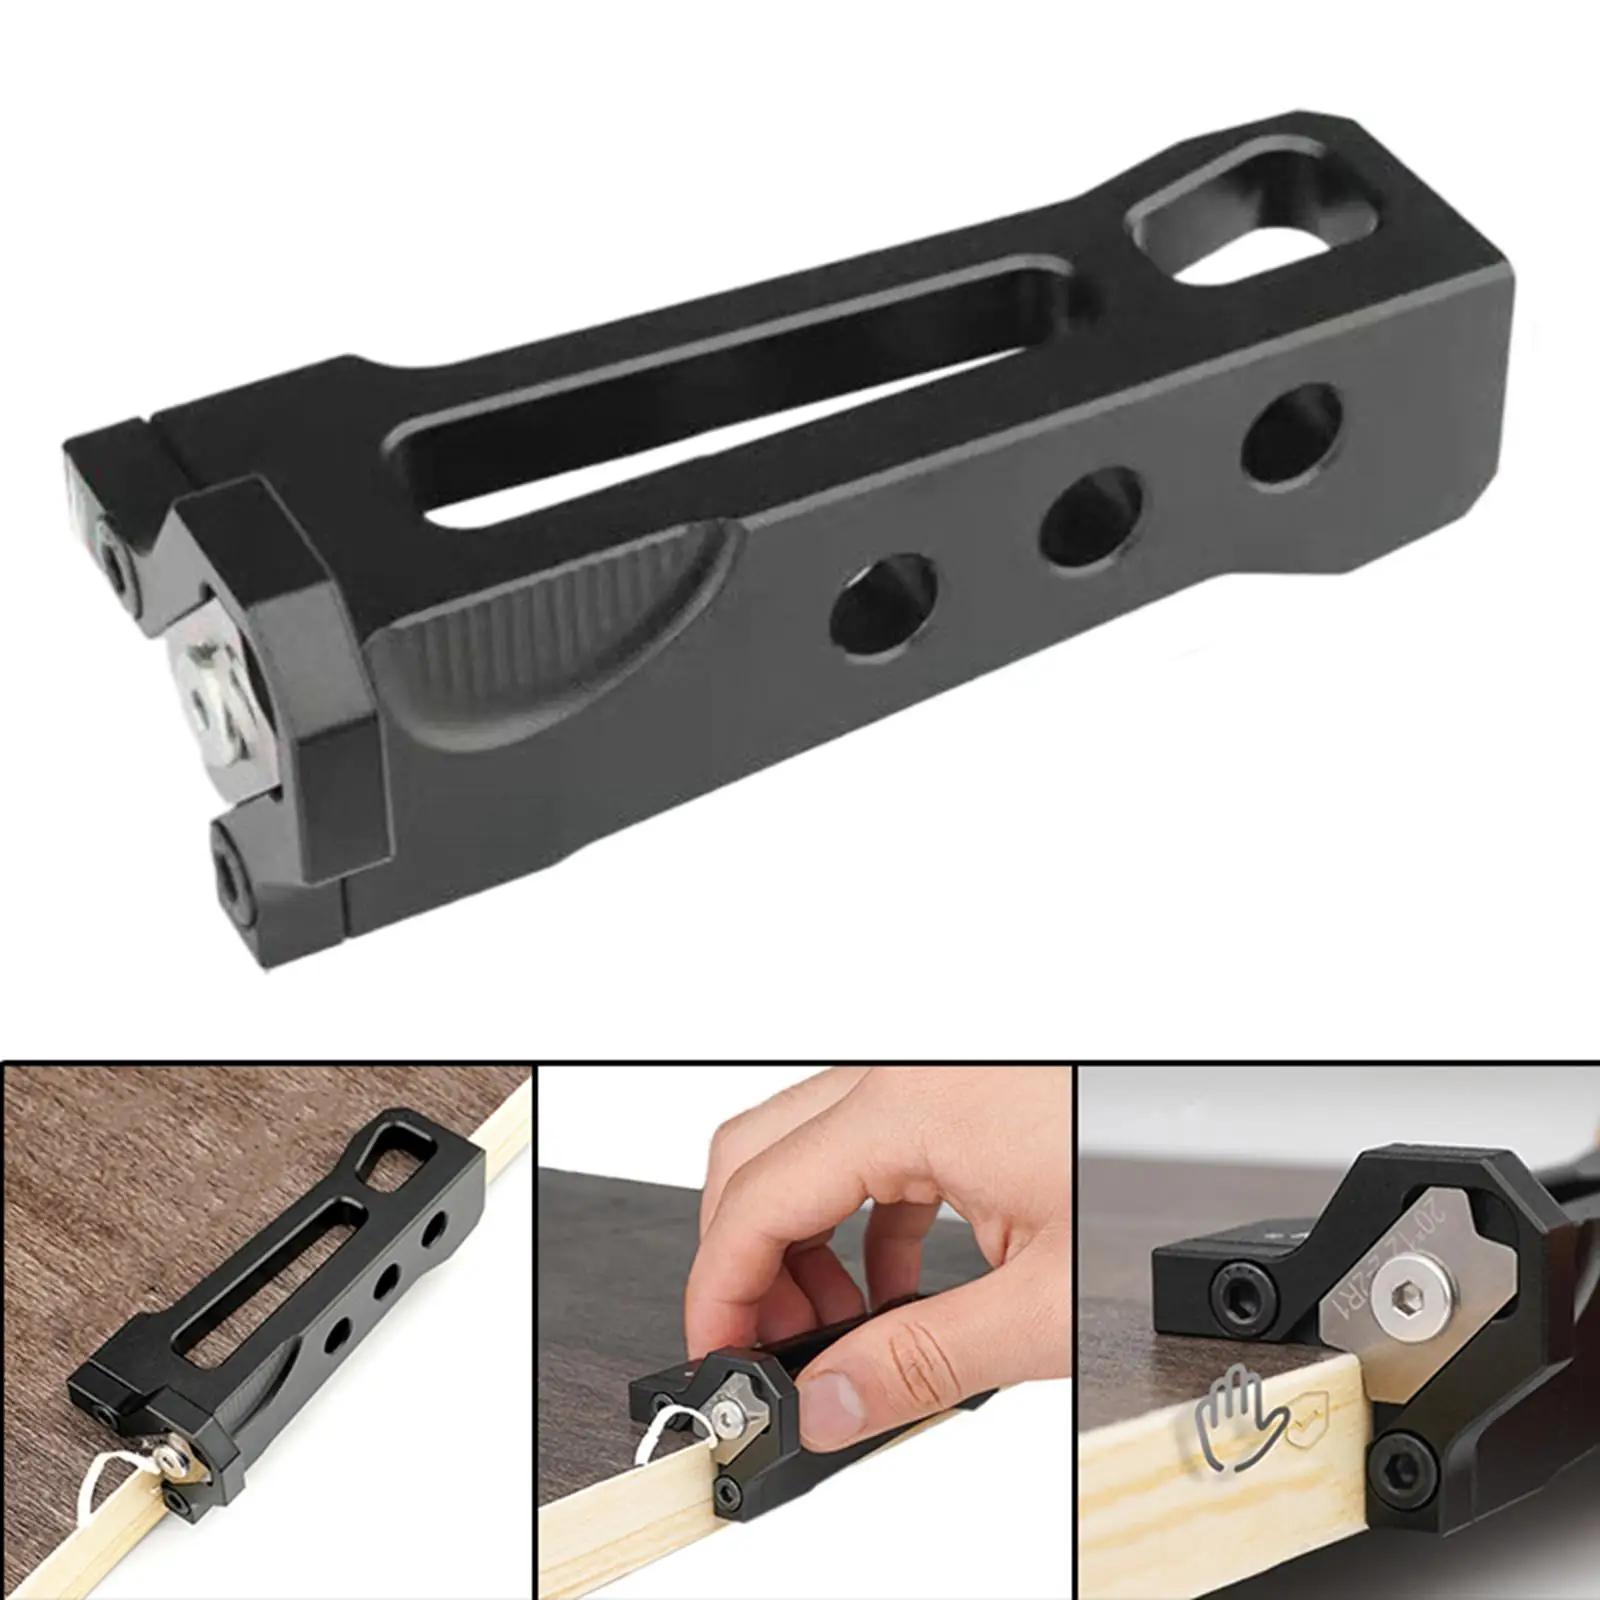 Mini Woodworking Edge Trimmer Deburring Tool Woodcraft Tool, Router Equipment Board Edge Planing for Woodworkers Gifts